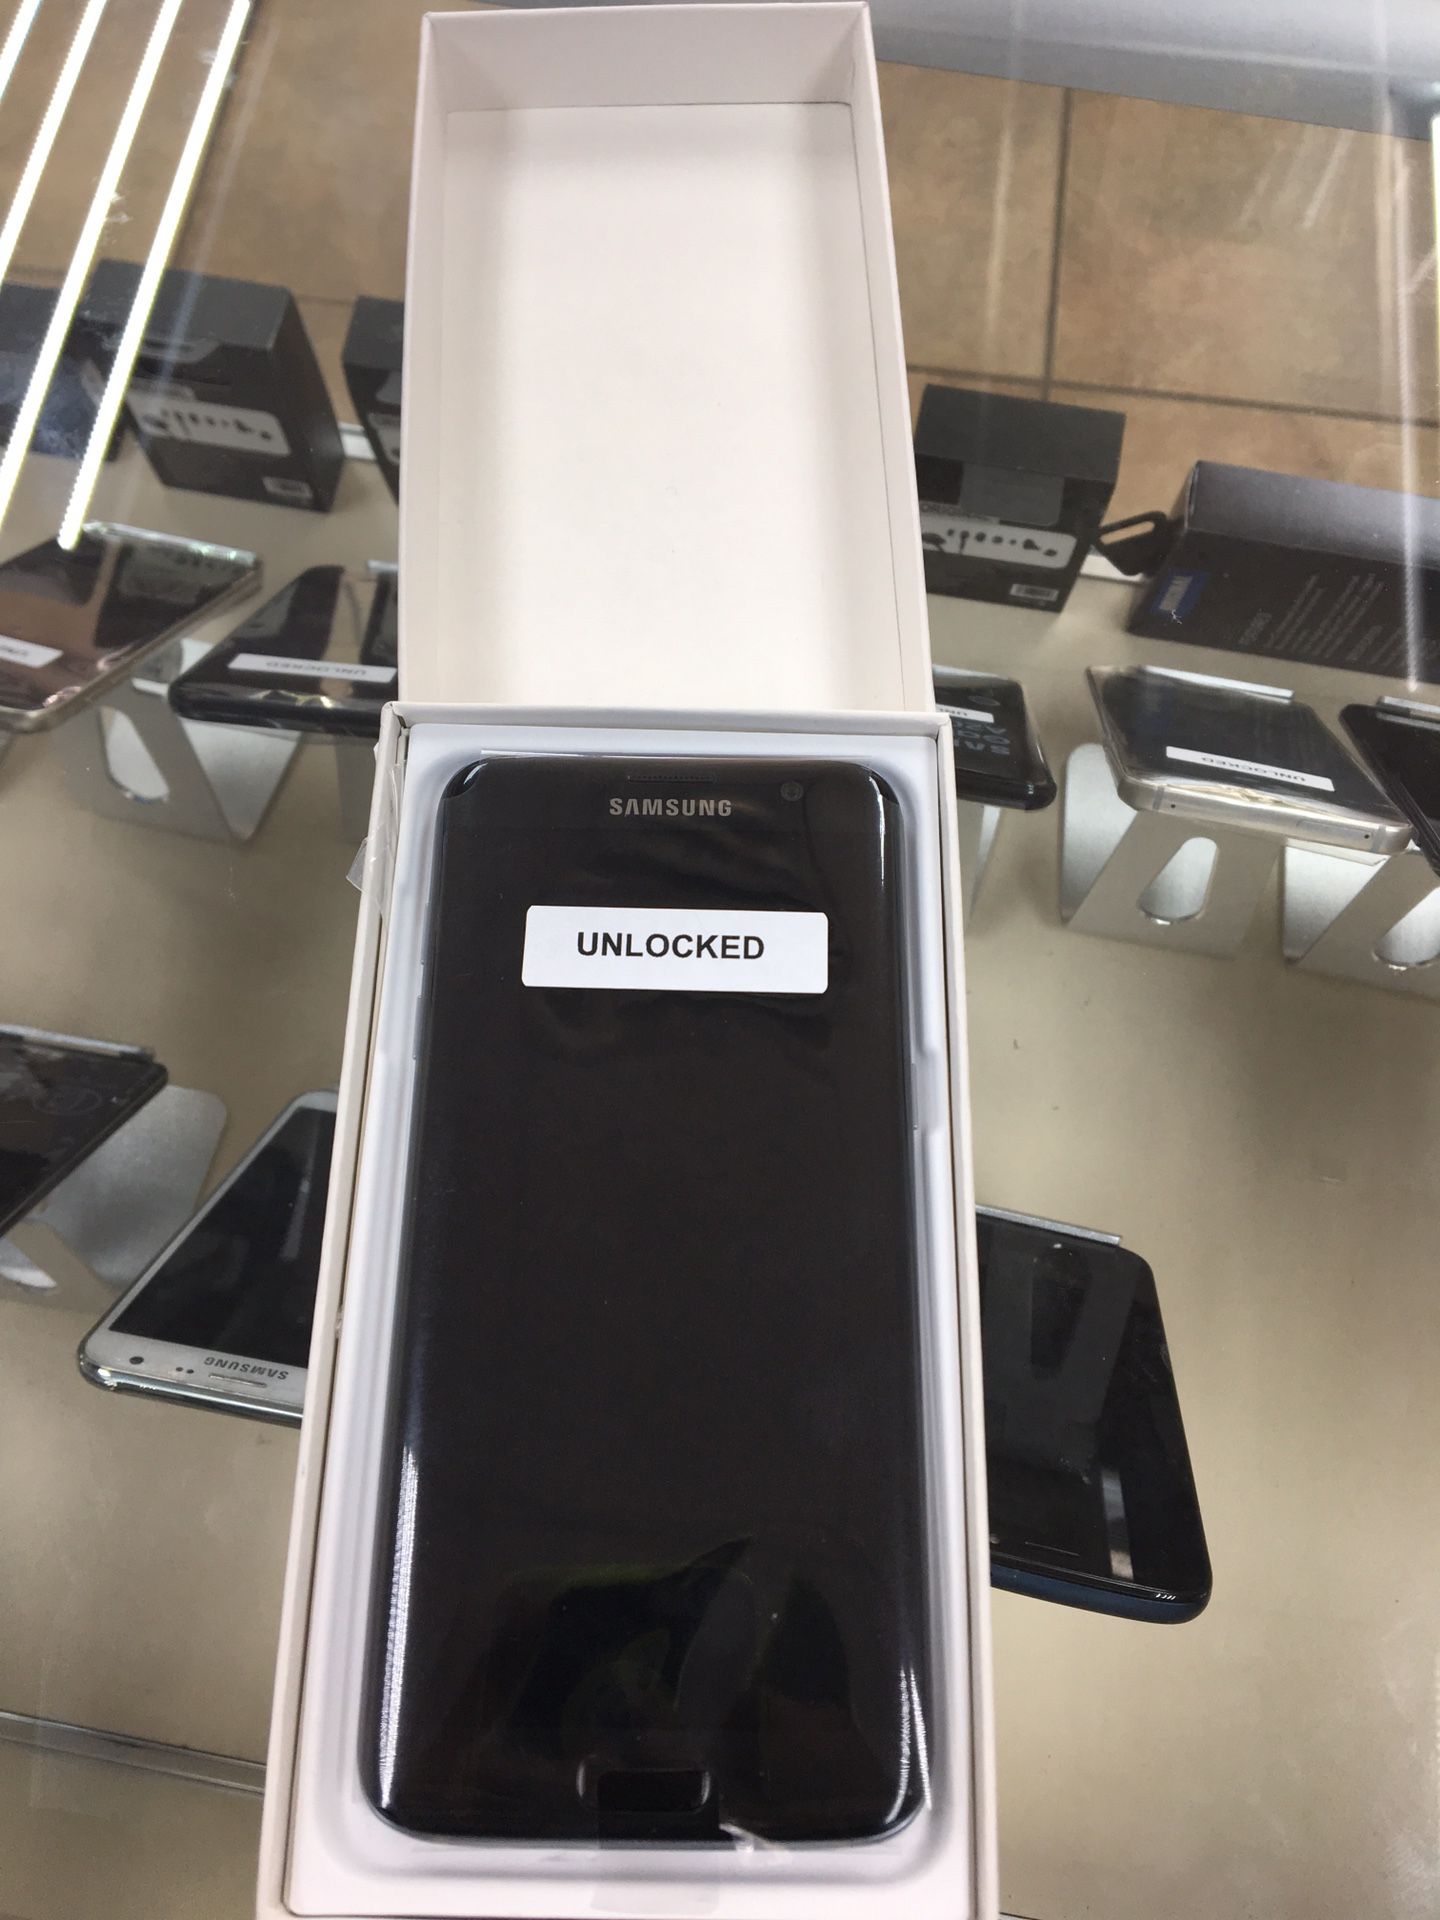 Samsung Galaxy S7 edge Unlocked with box and all accessories